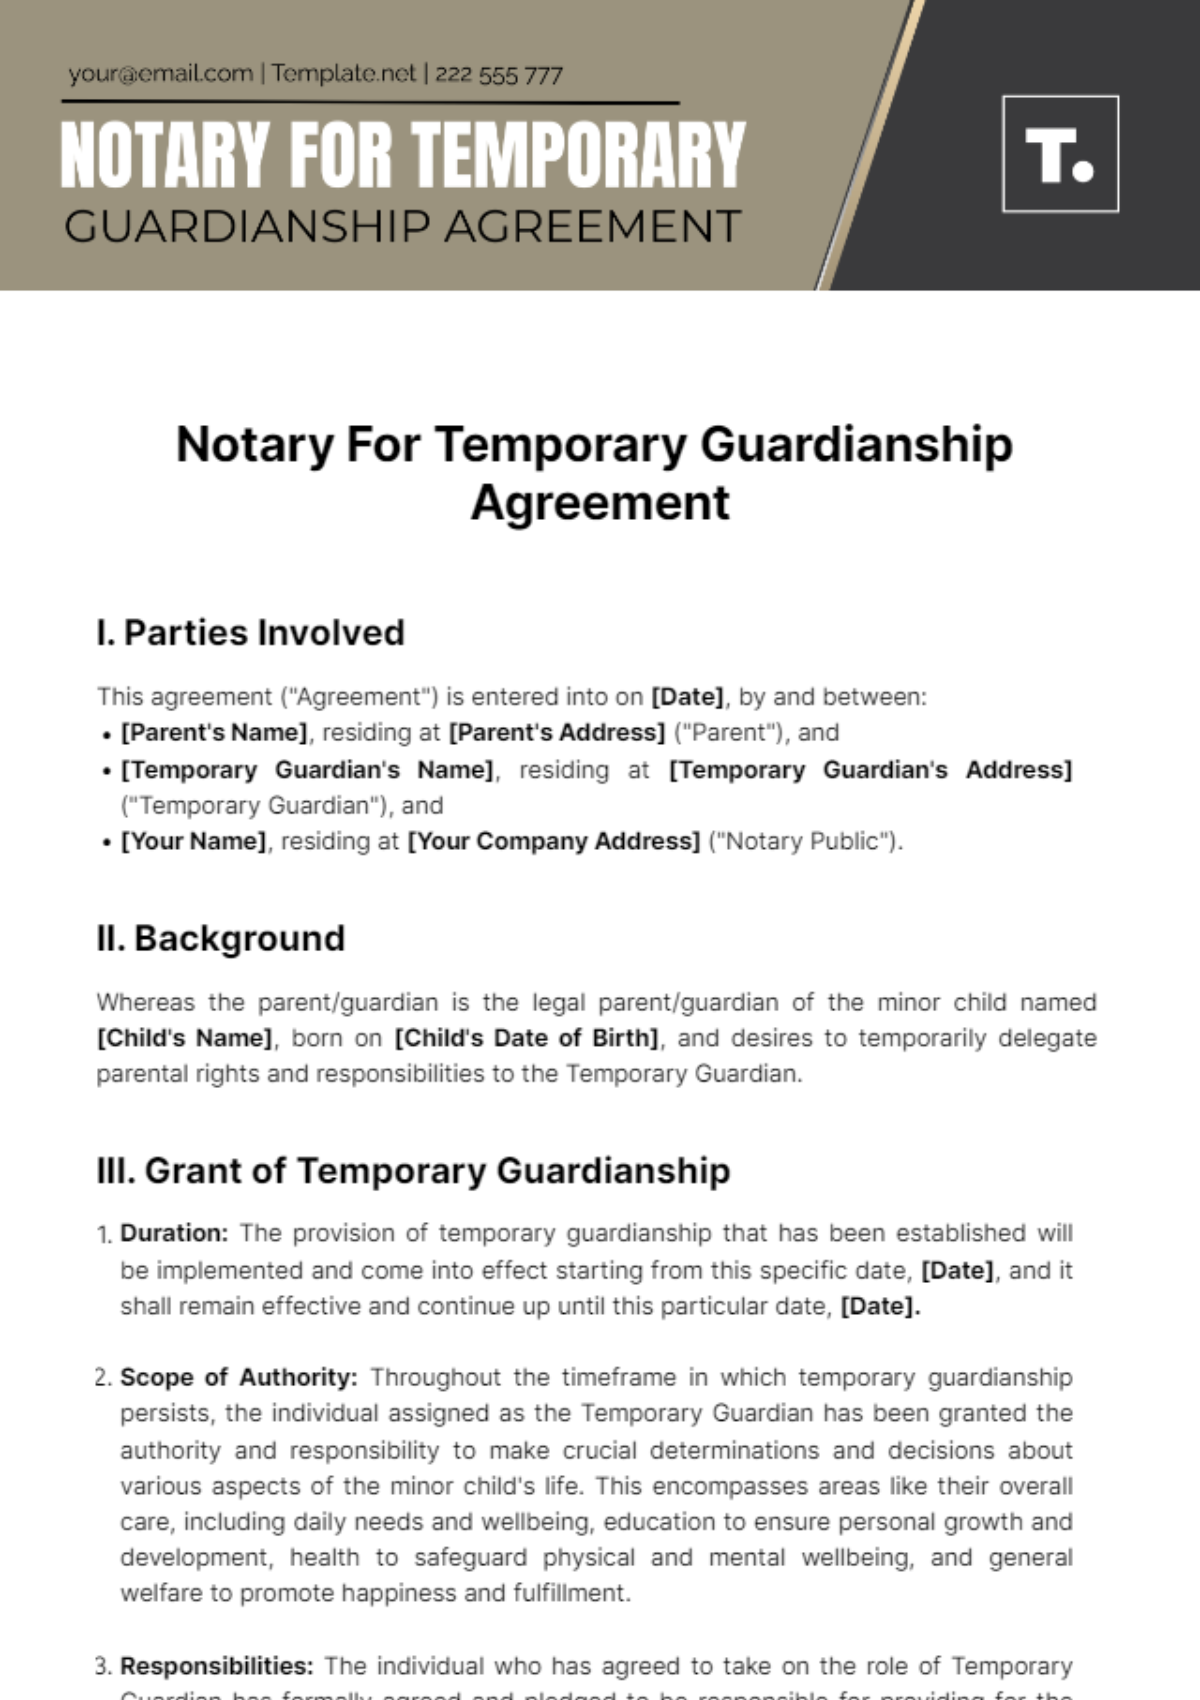 Free Notary For Temporary Guardianship Agreement Template